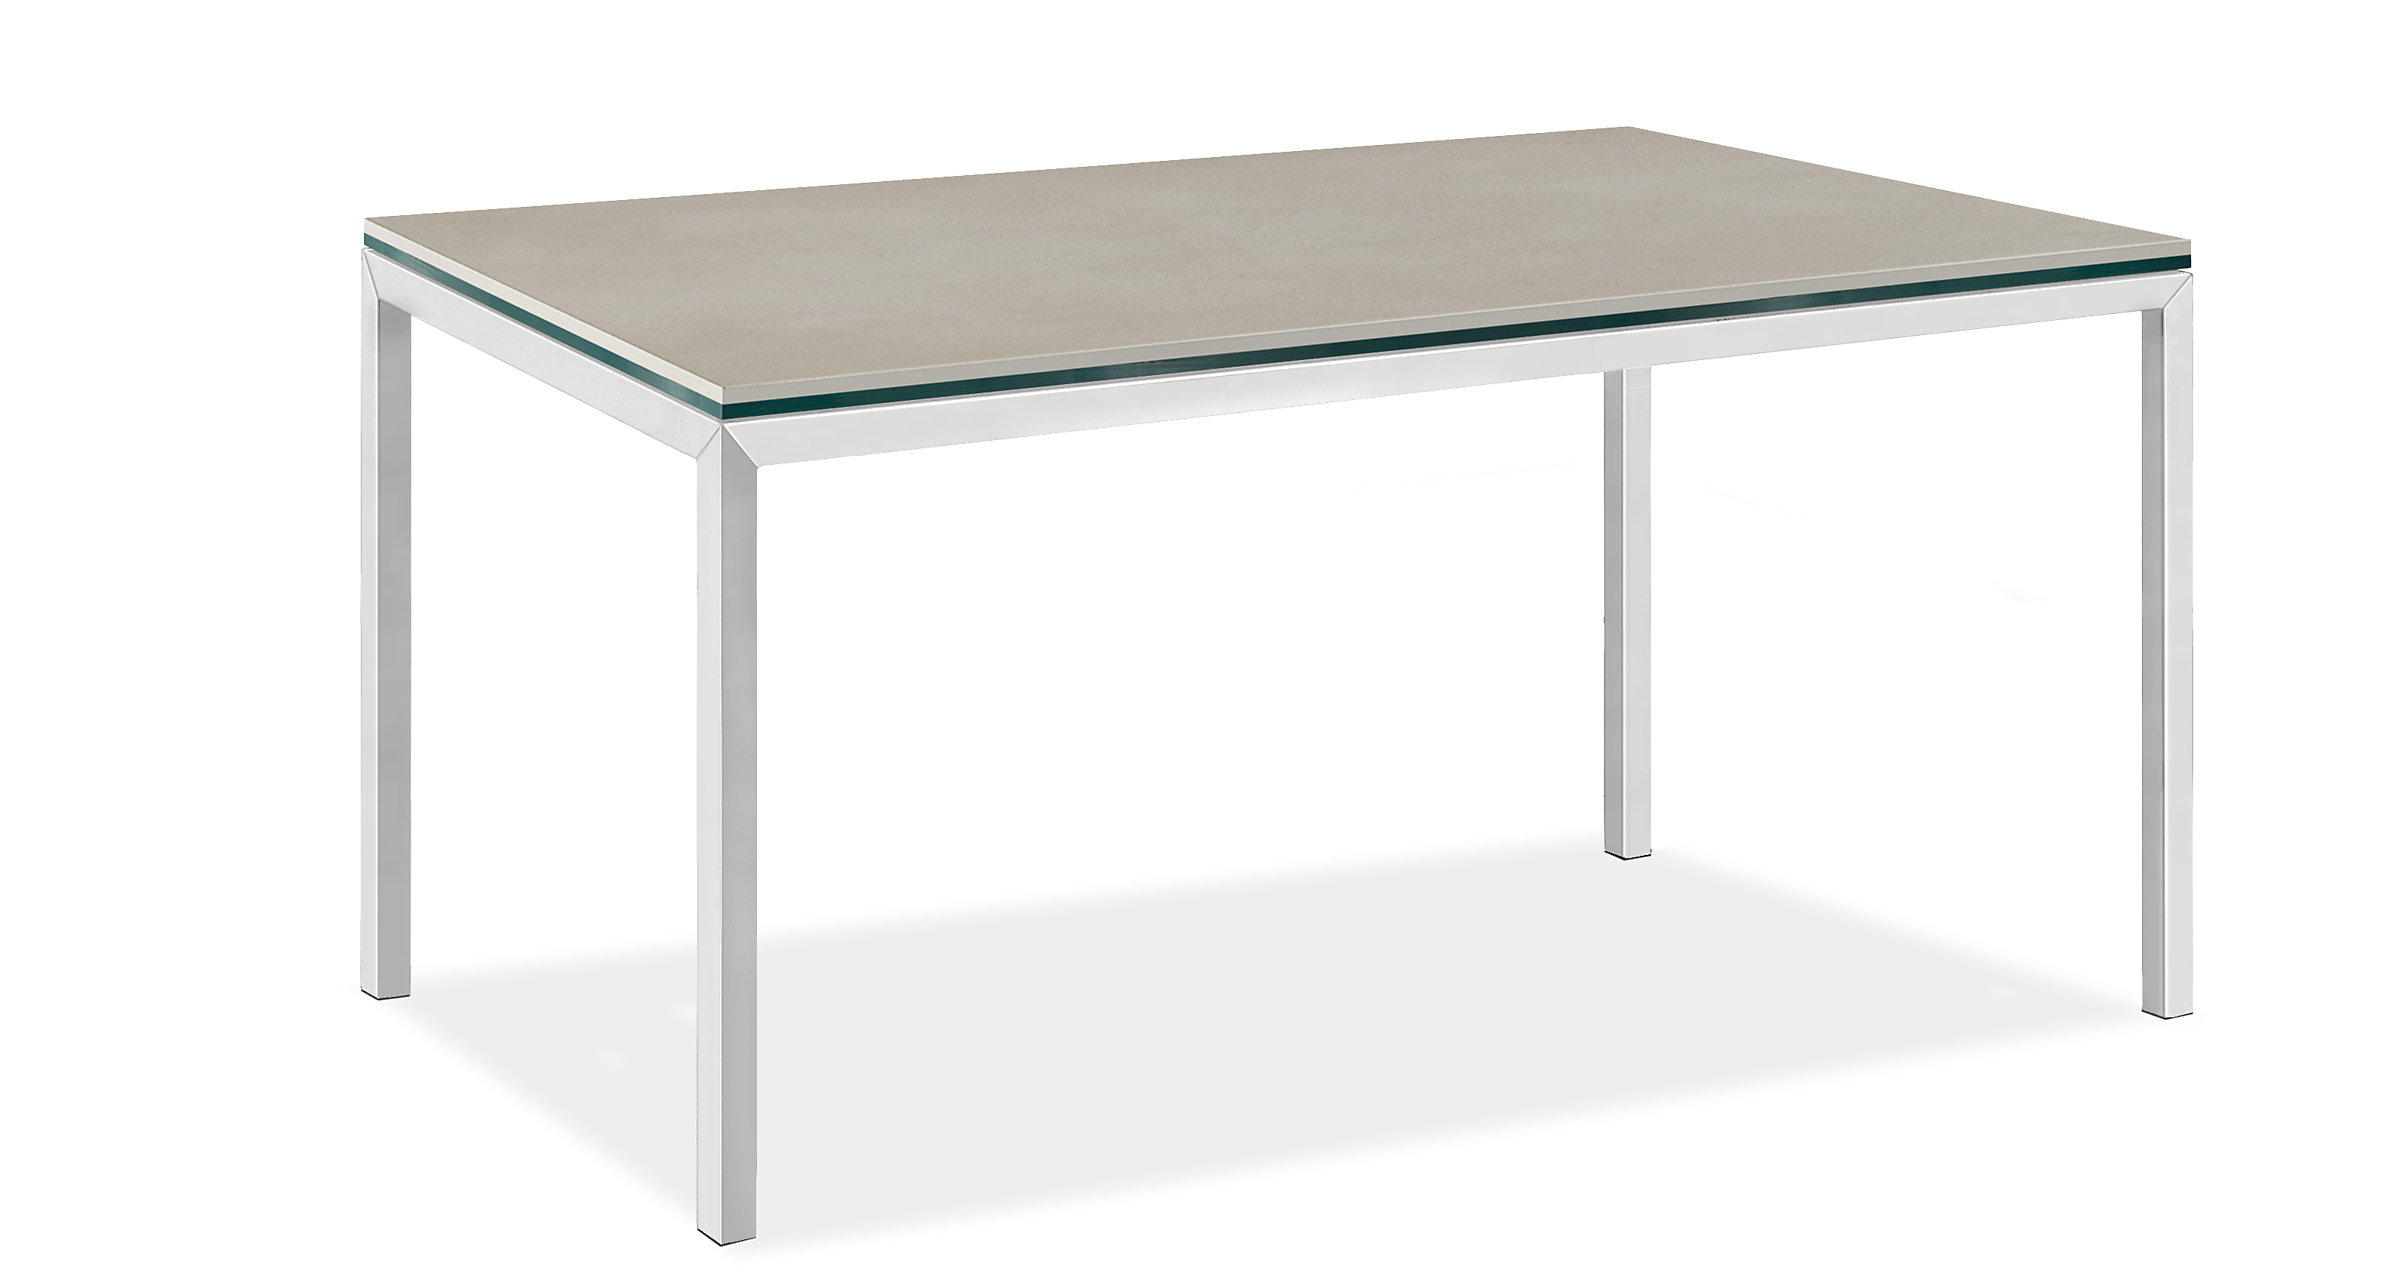 Parsons 60w 36d Outdoor Table with 1.5" Leg